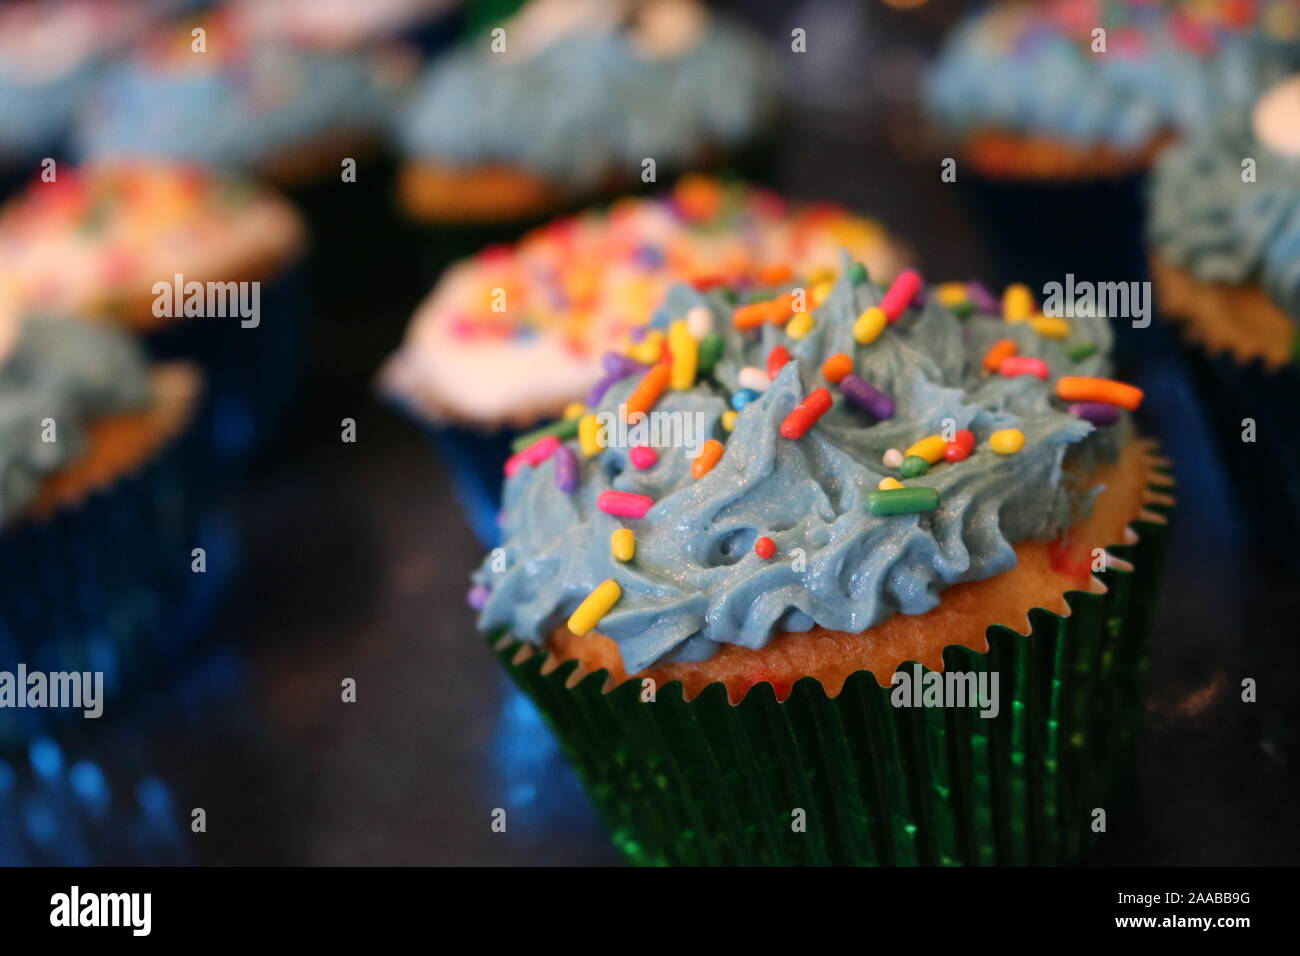 Delicious cupcakes with blue and white frosting with sprinkles Stock Photo